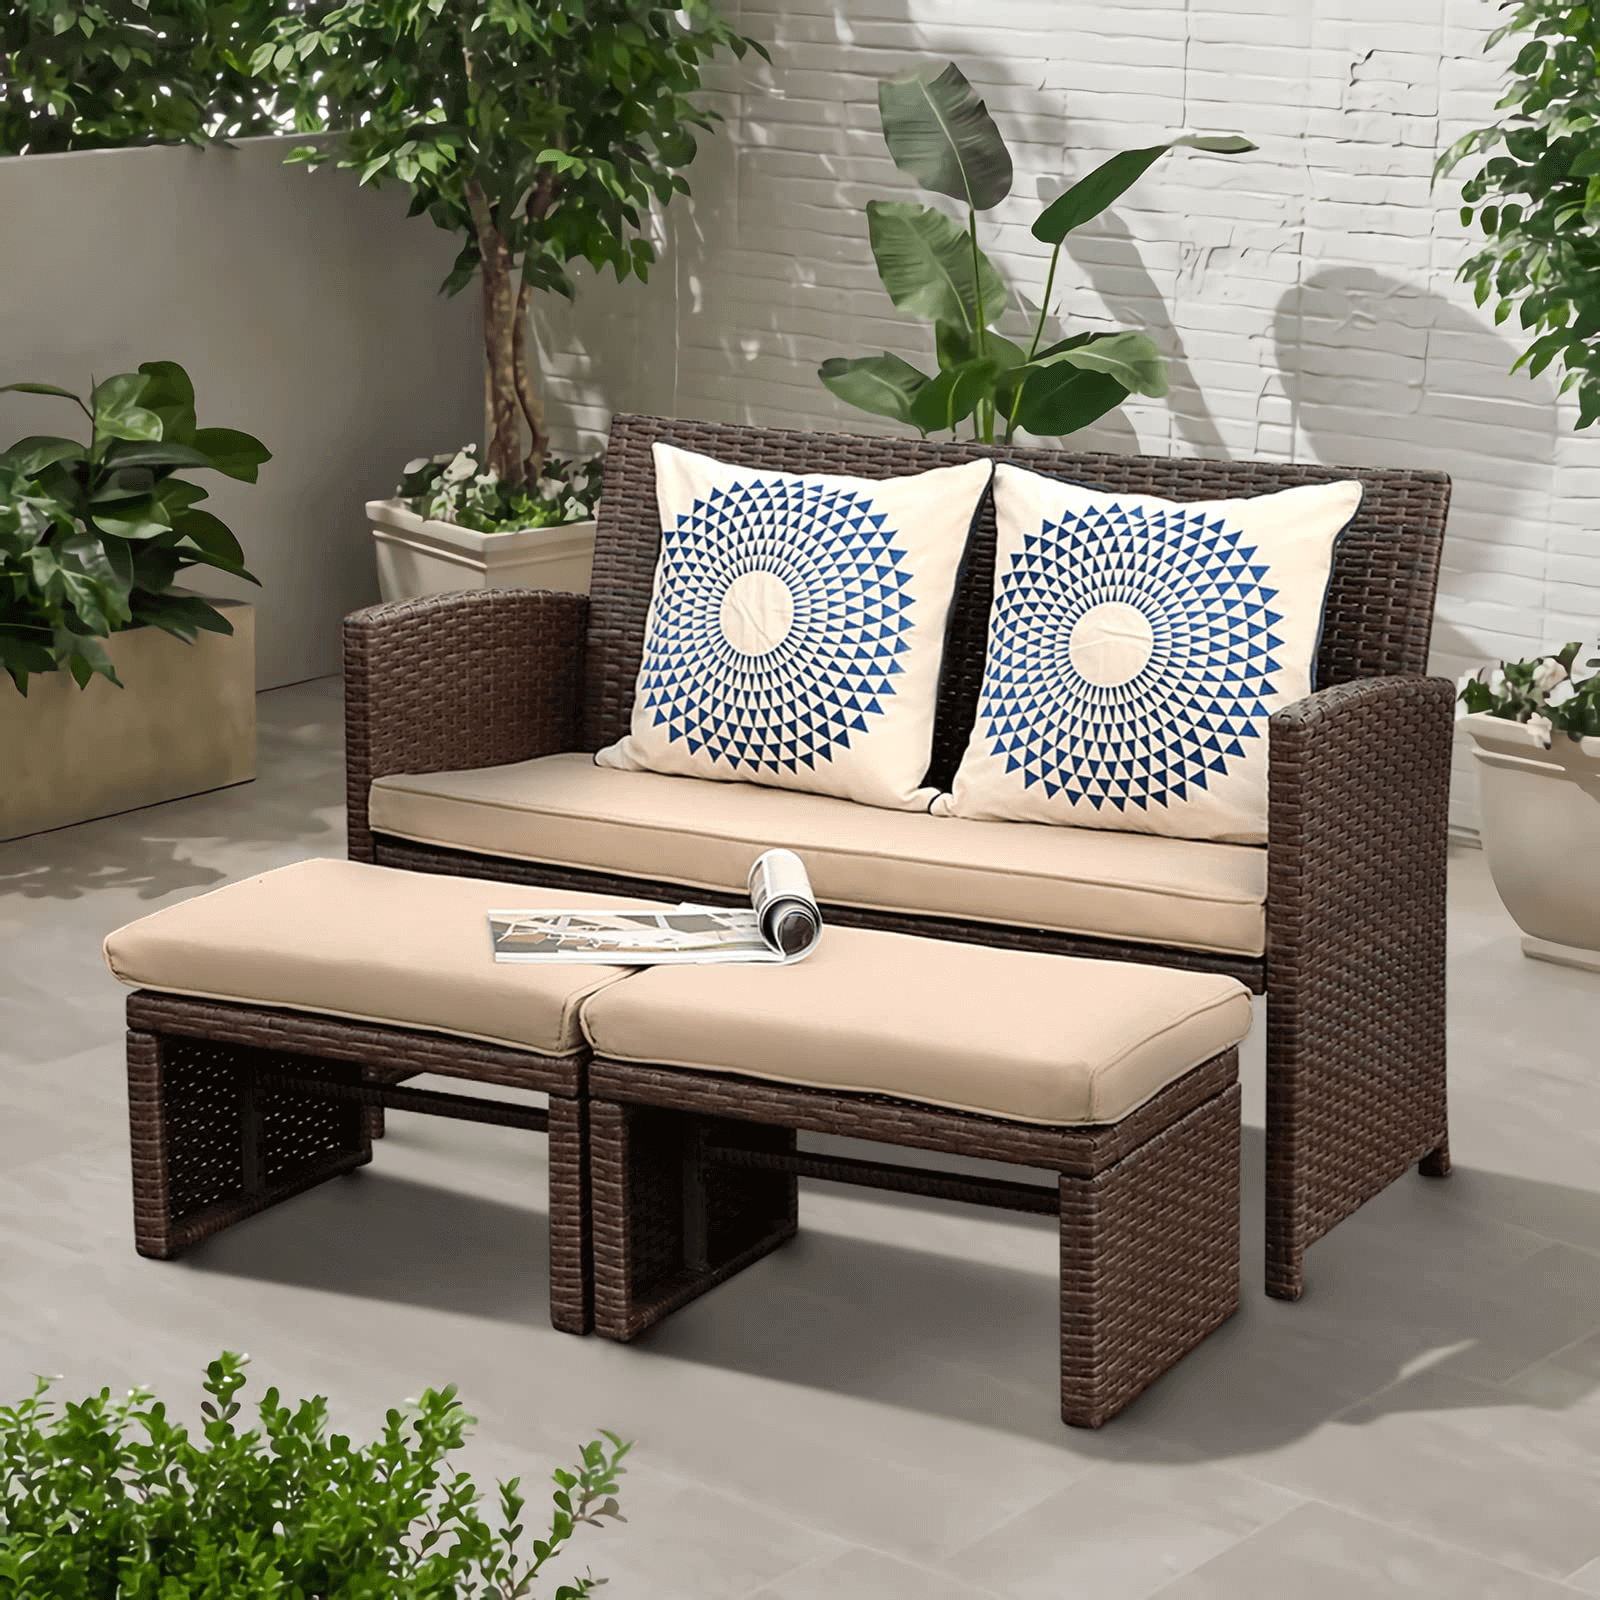 3pcs All Weather Wicker Loveseat with Ottomans for Balcony, Deck, Backyard, Porch | Orange-Casual